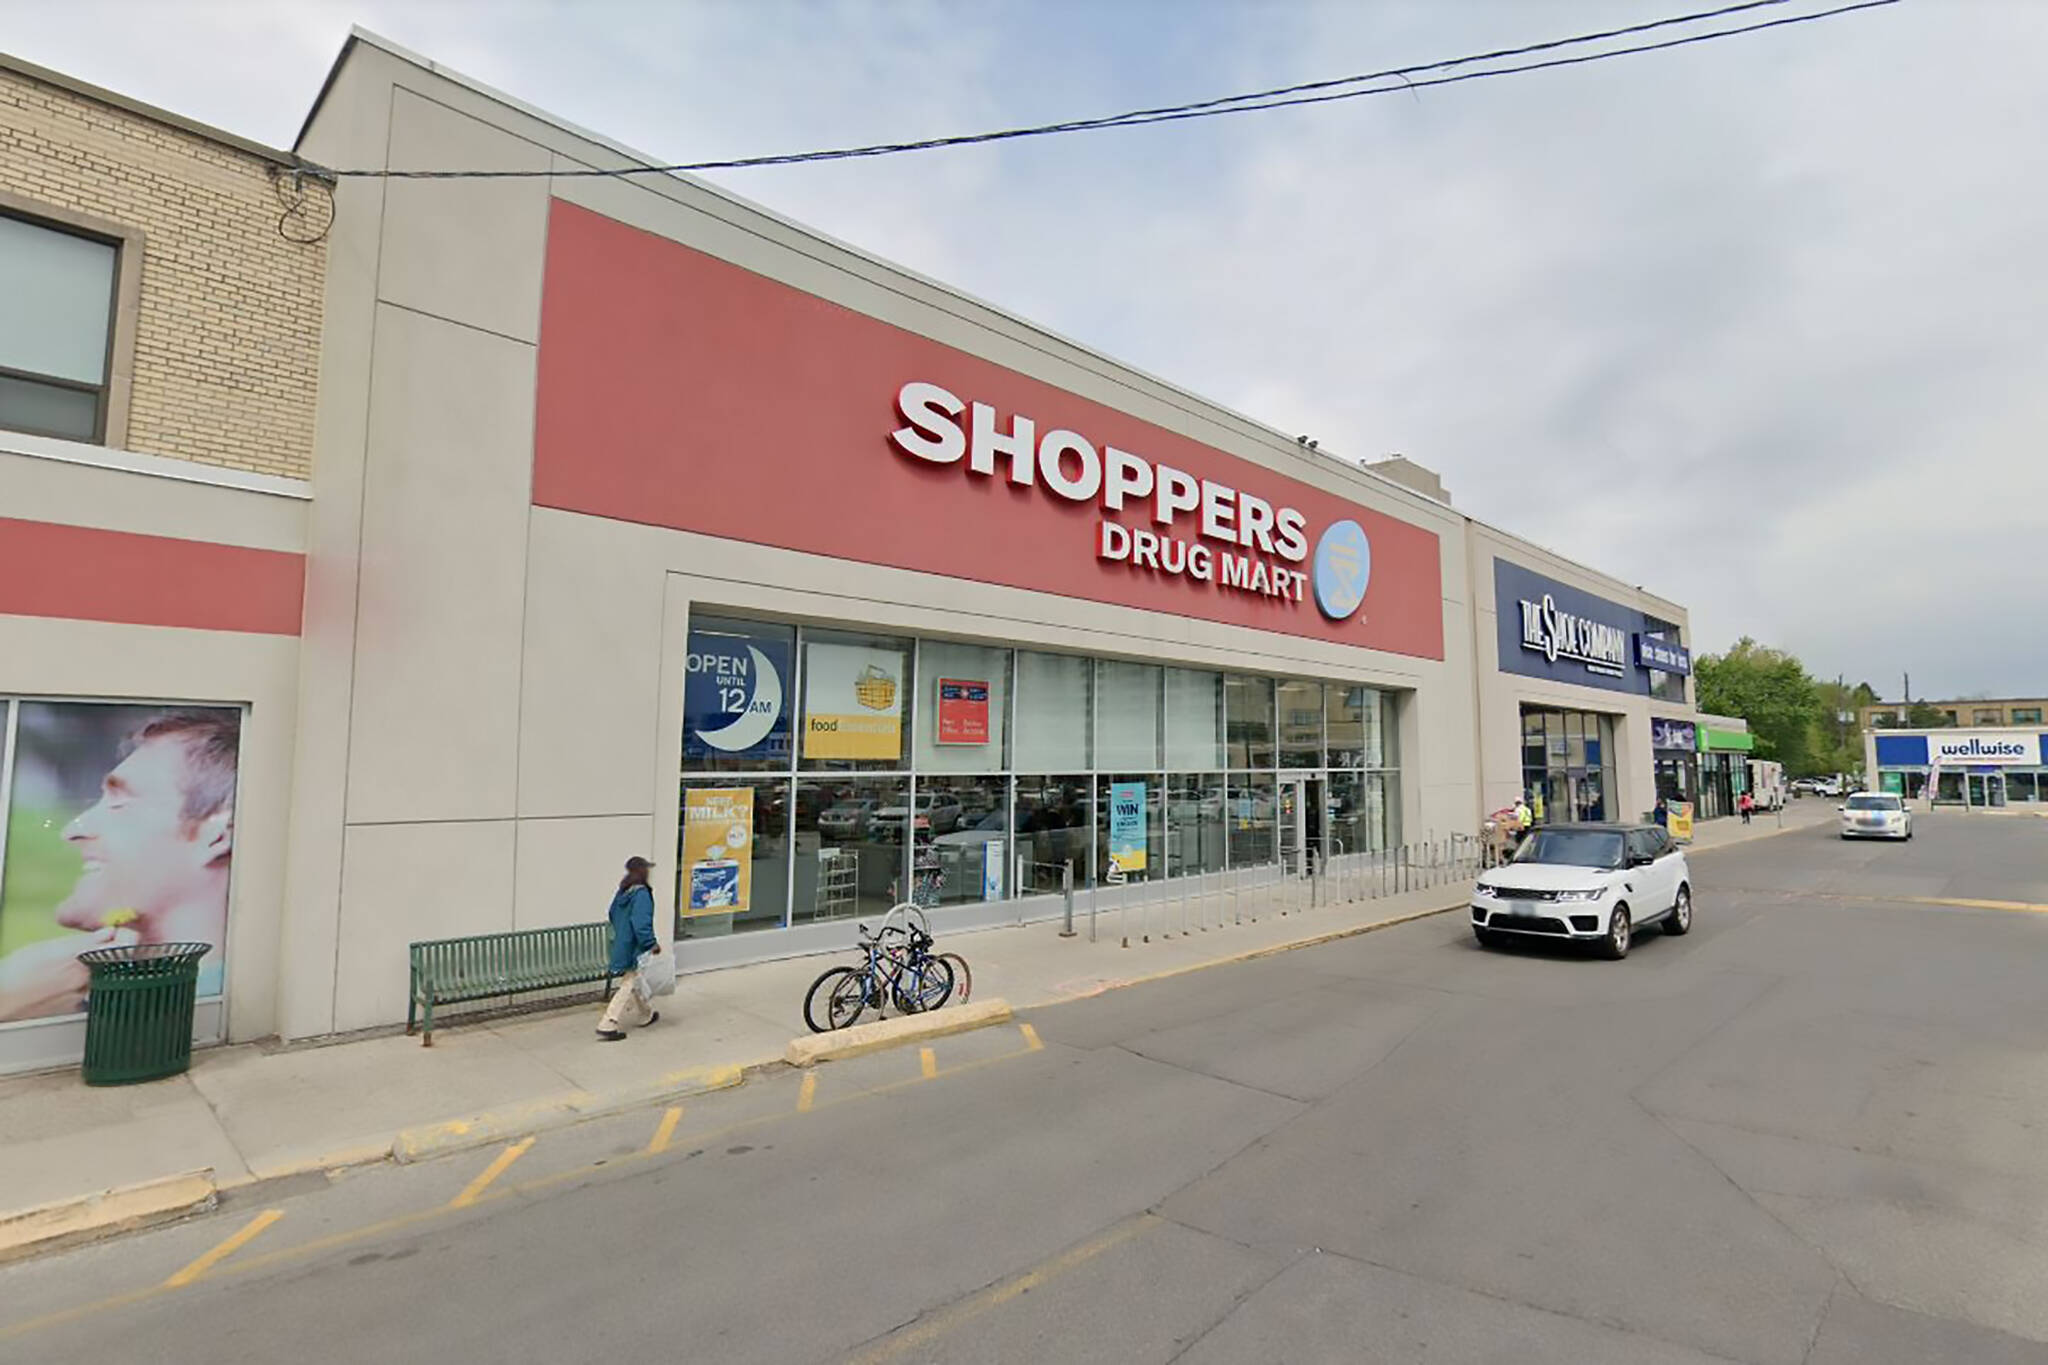 Shoppers Drug Mart blasted again for charging 5x more for